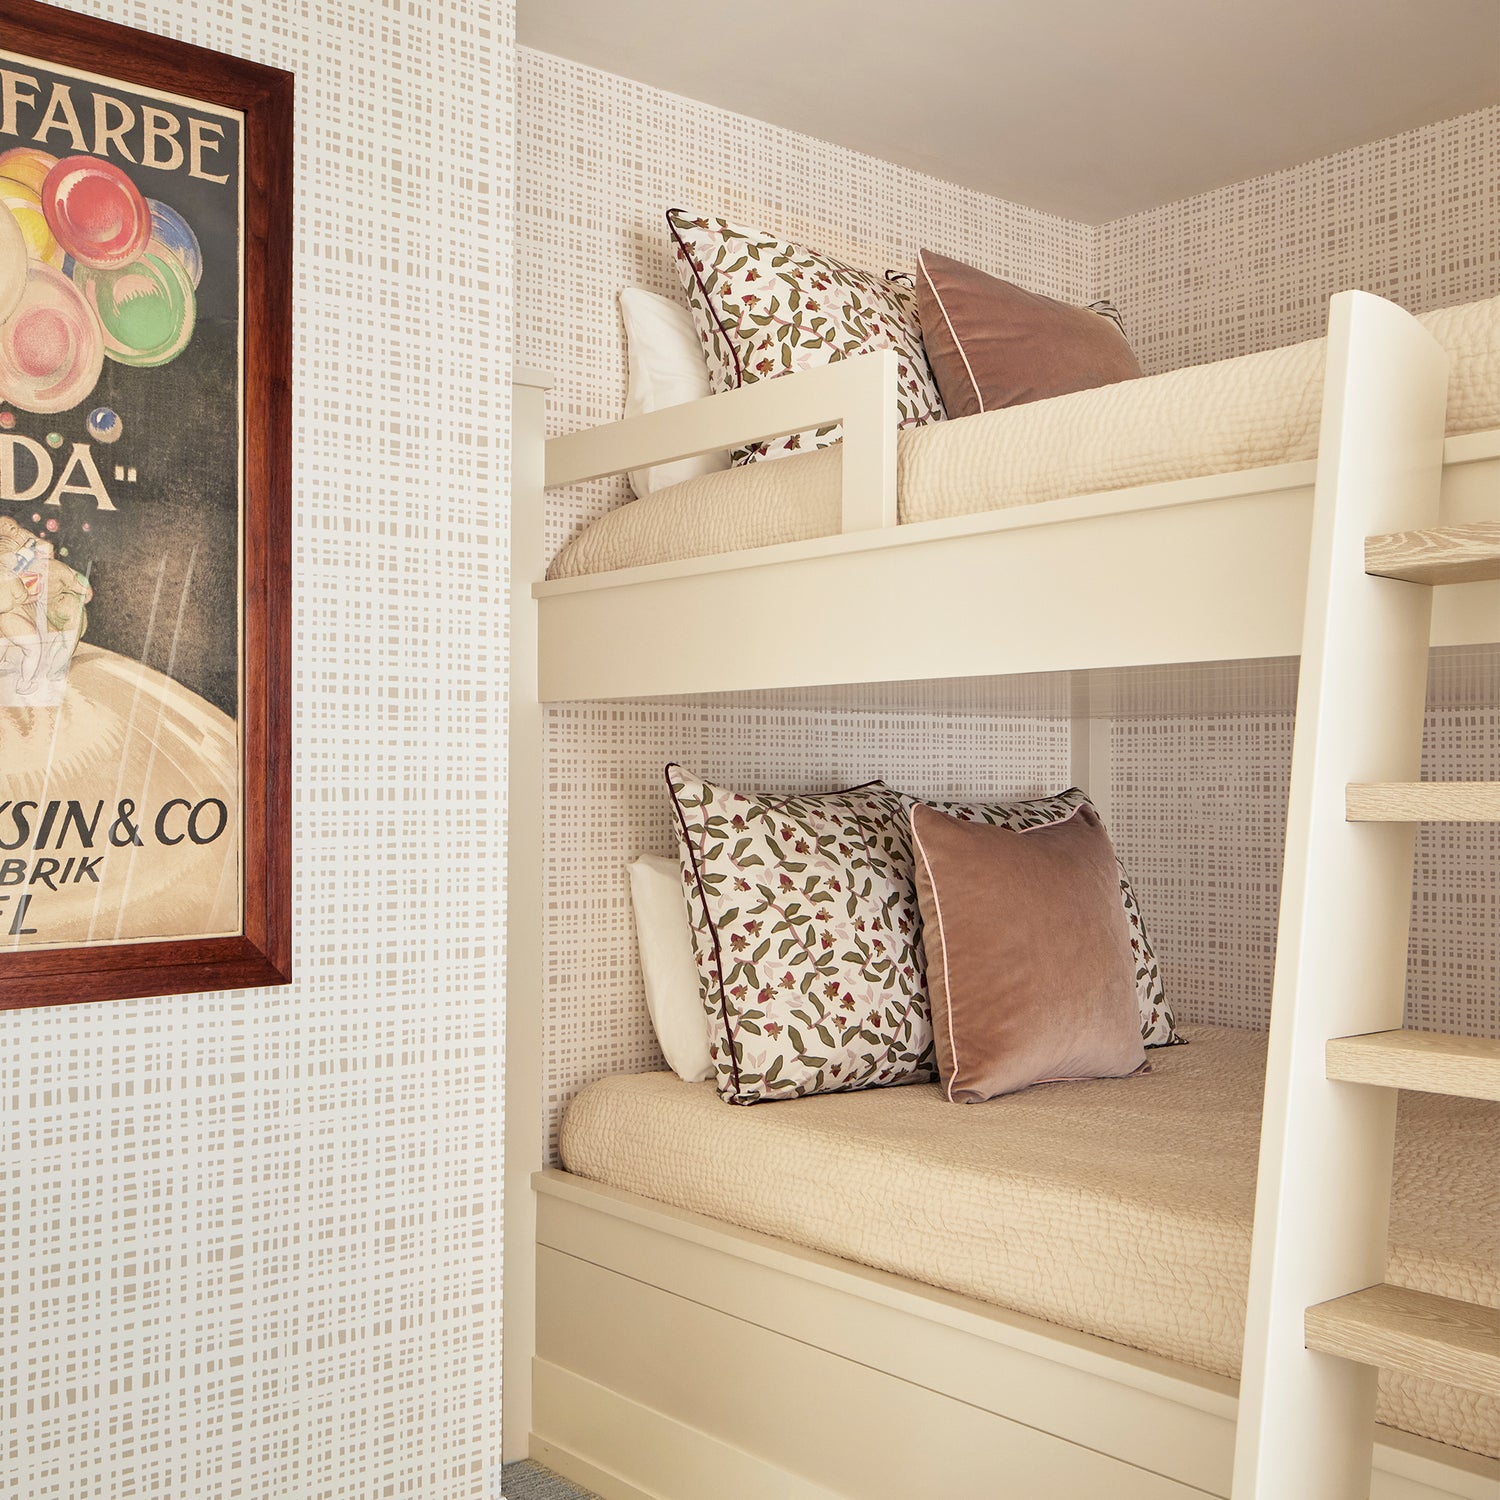 Bedroom corner styled with Beige Gingham Printed Wallpaper by bunk beds with a Strawberry & Botanical Printed Pillow and a Mauve Velvet Pillow on each